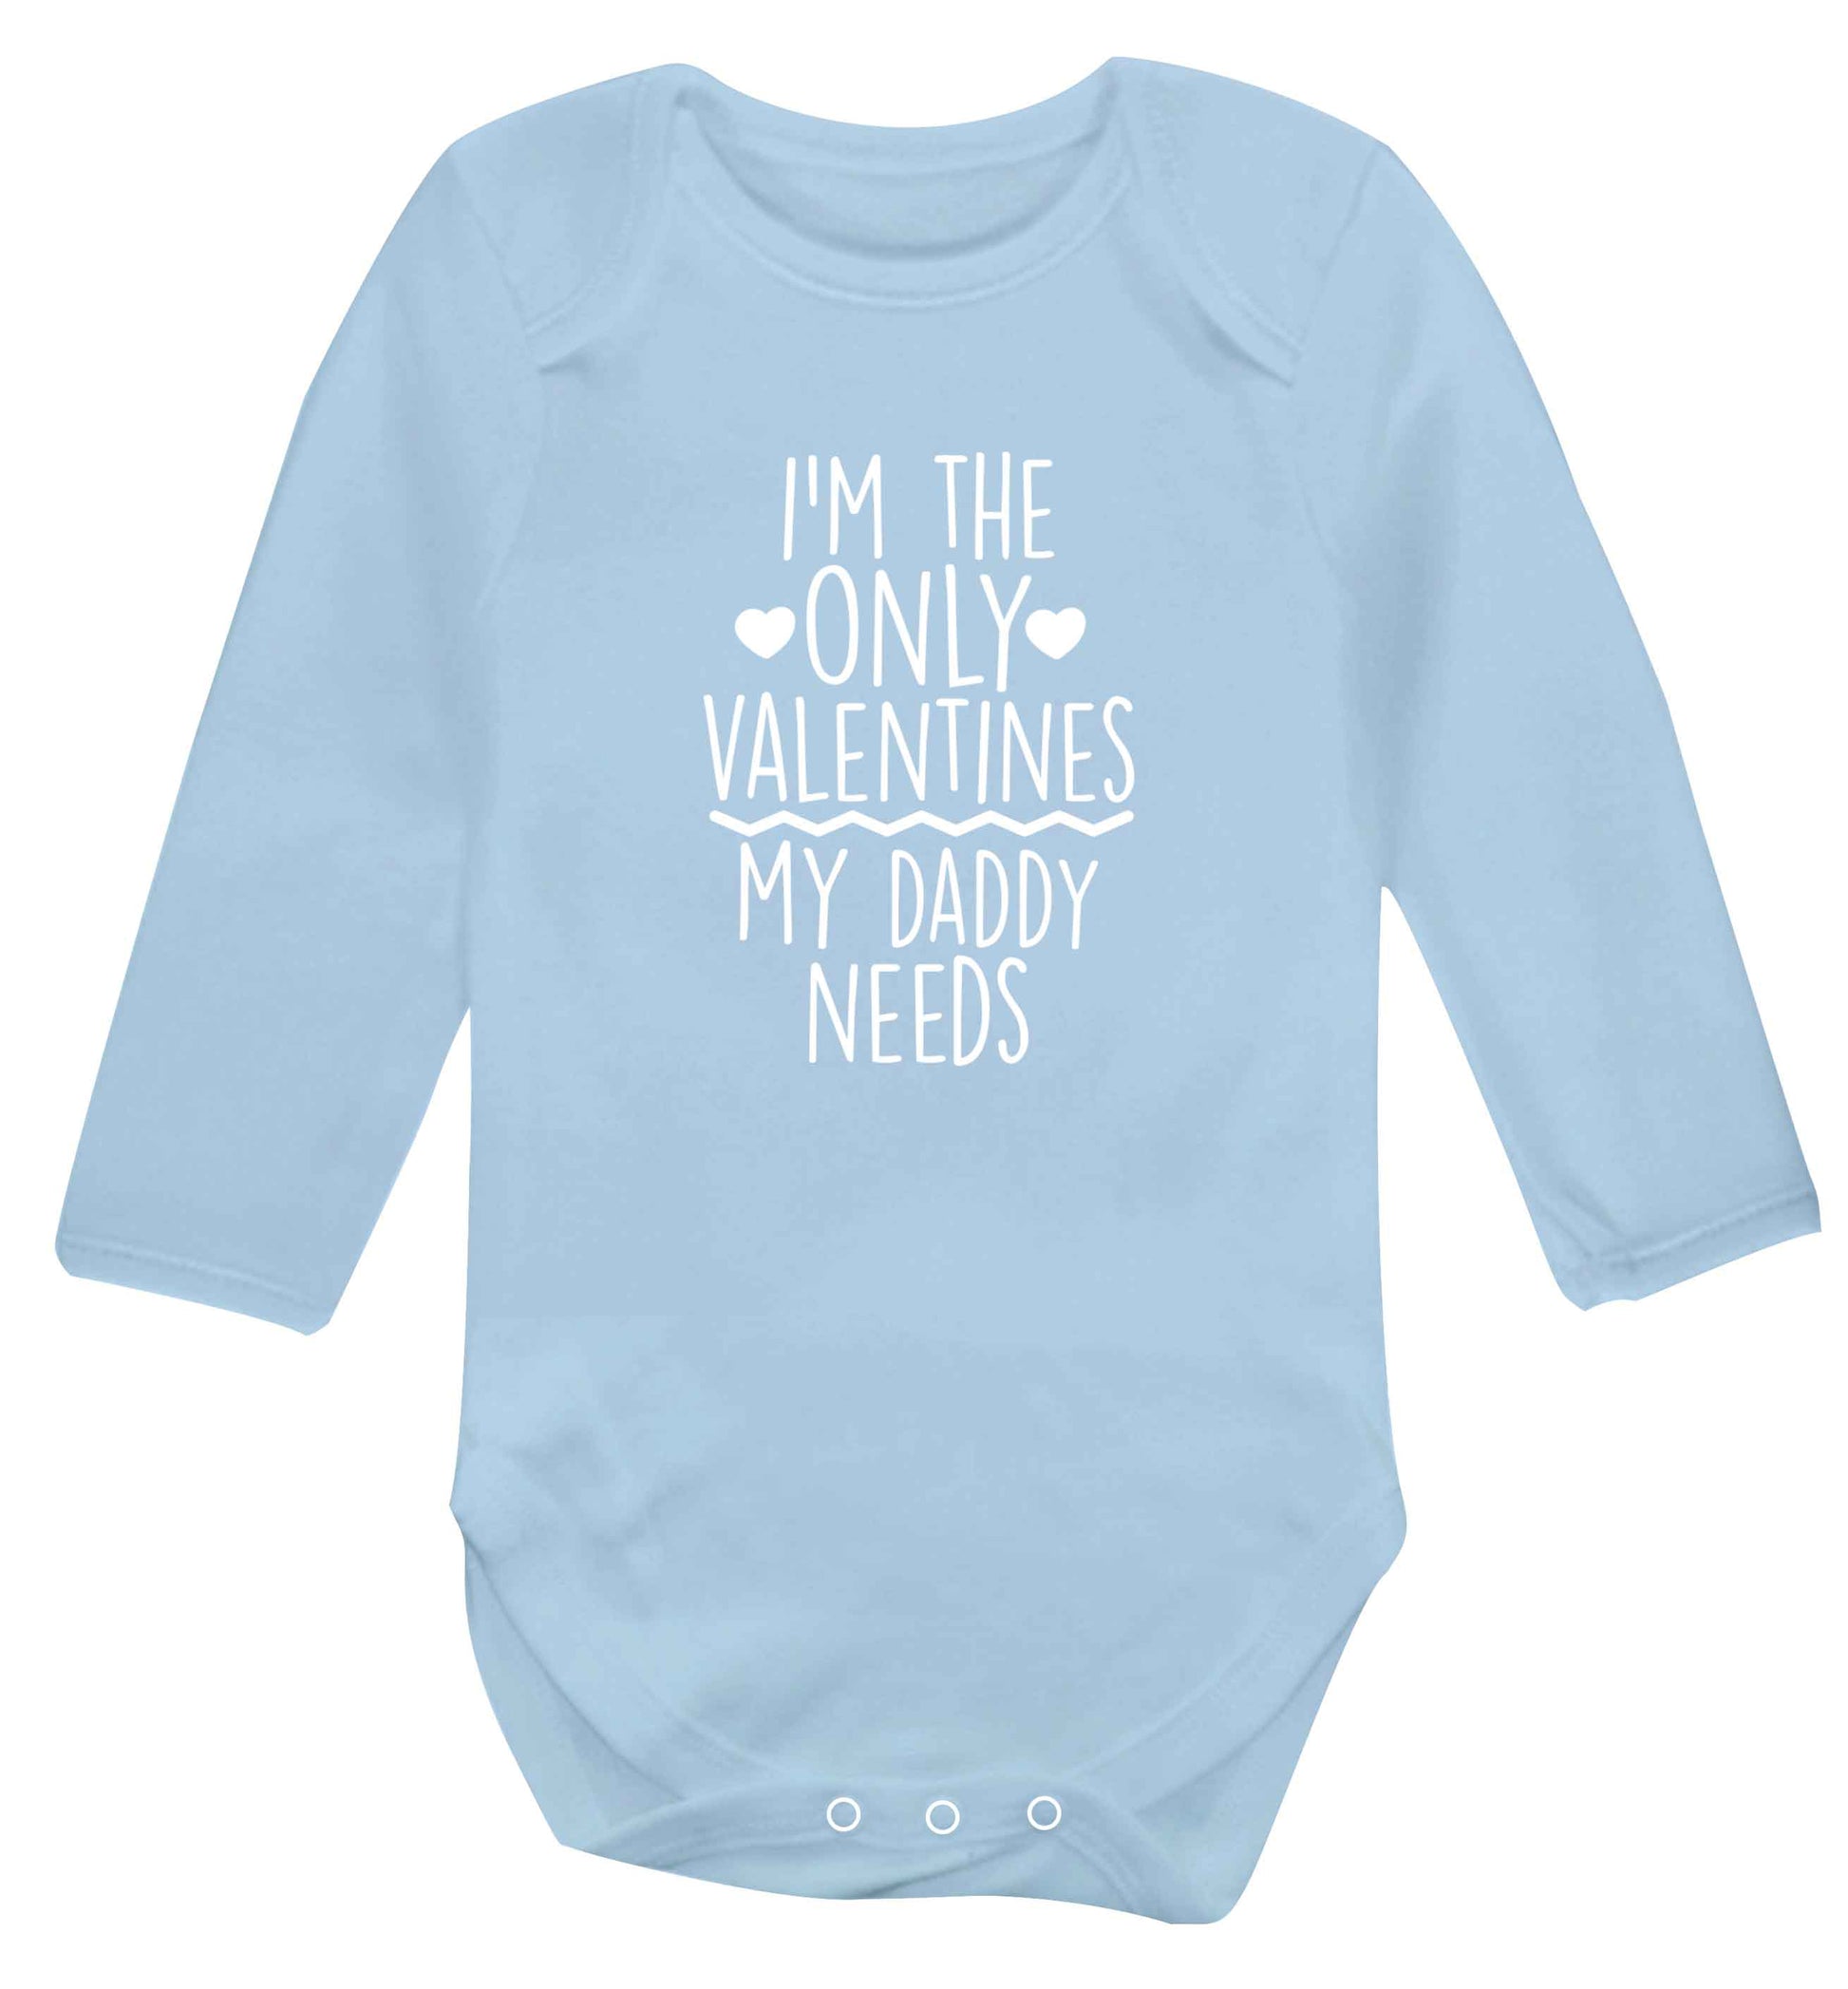 I'm the only valentines my daddy needs baby vest long sleeved pale blue 6-12 months